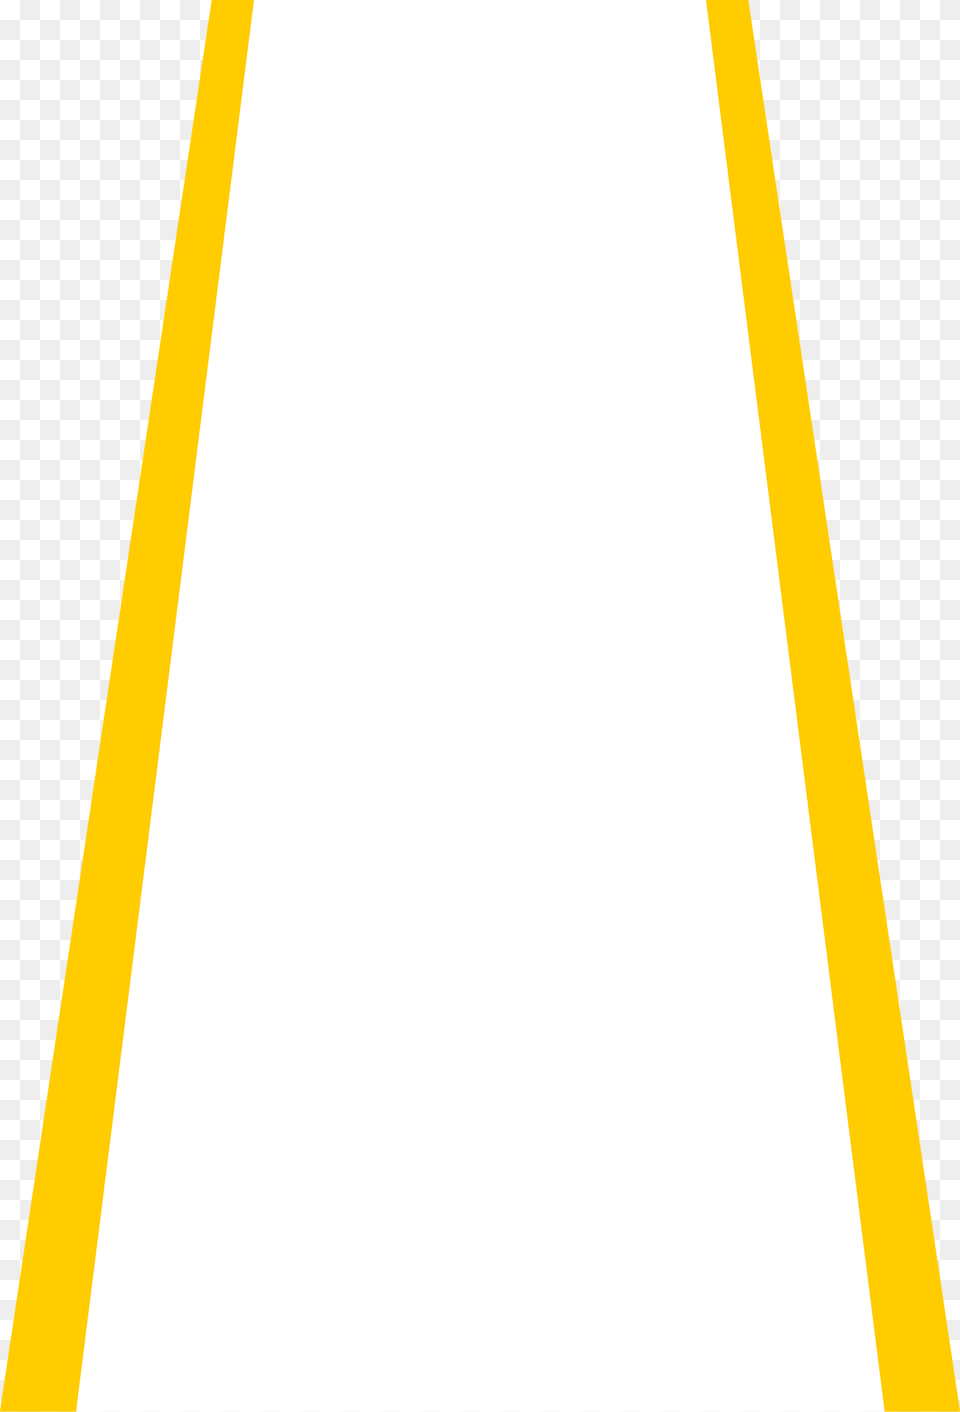 Yellow Trapeze Light Clipart, Triangle, Lighting Free Transparent Png